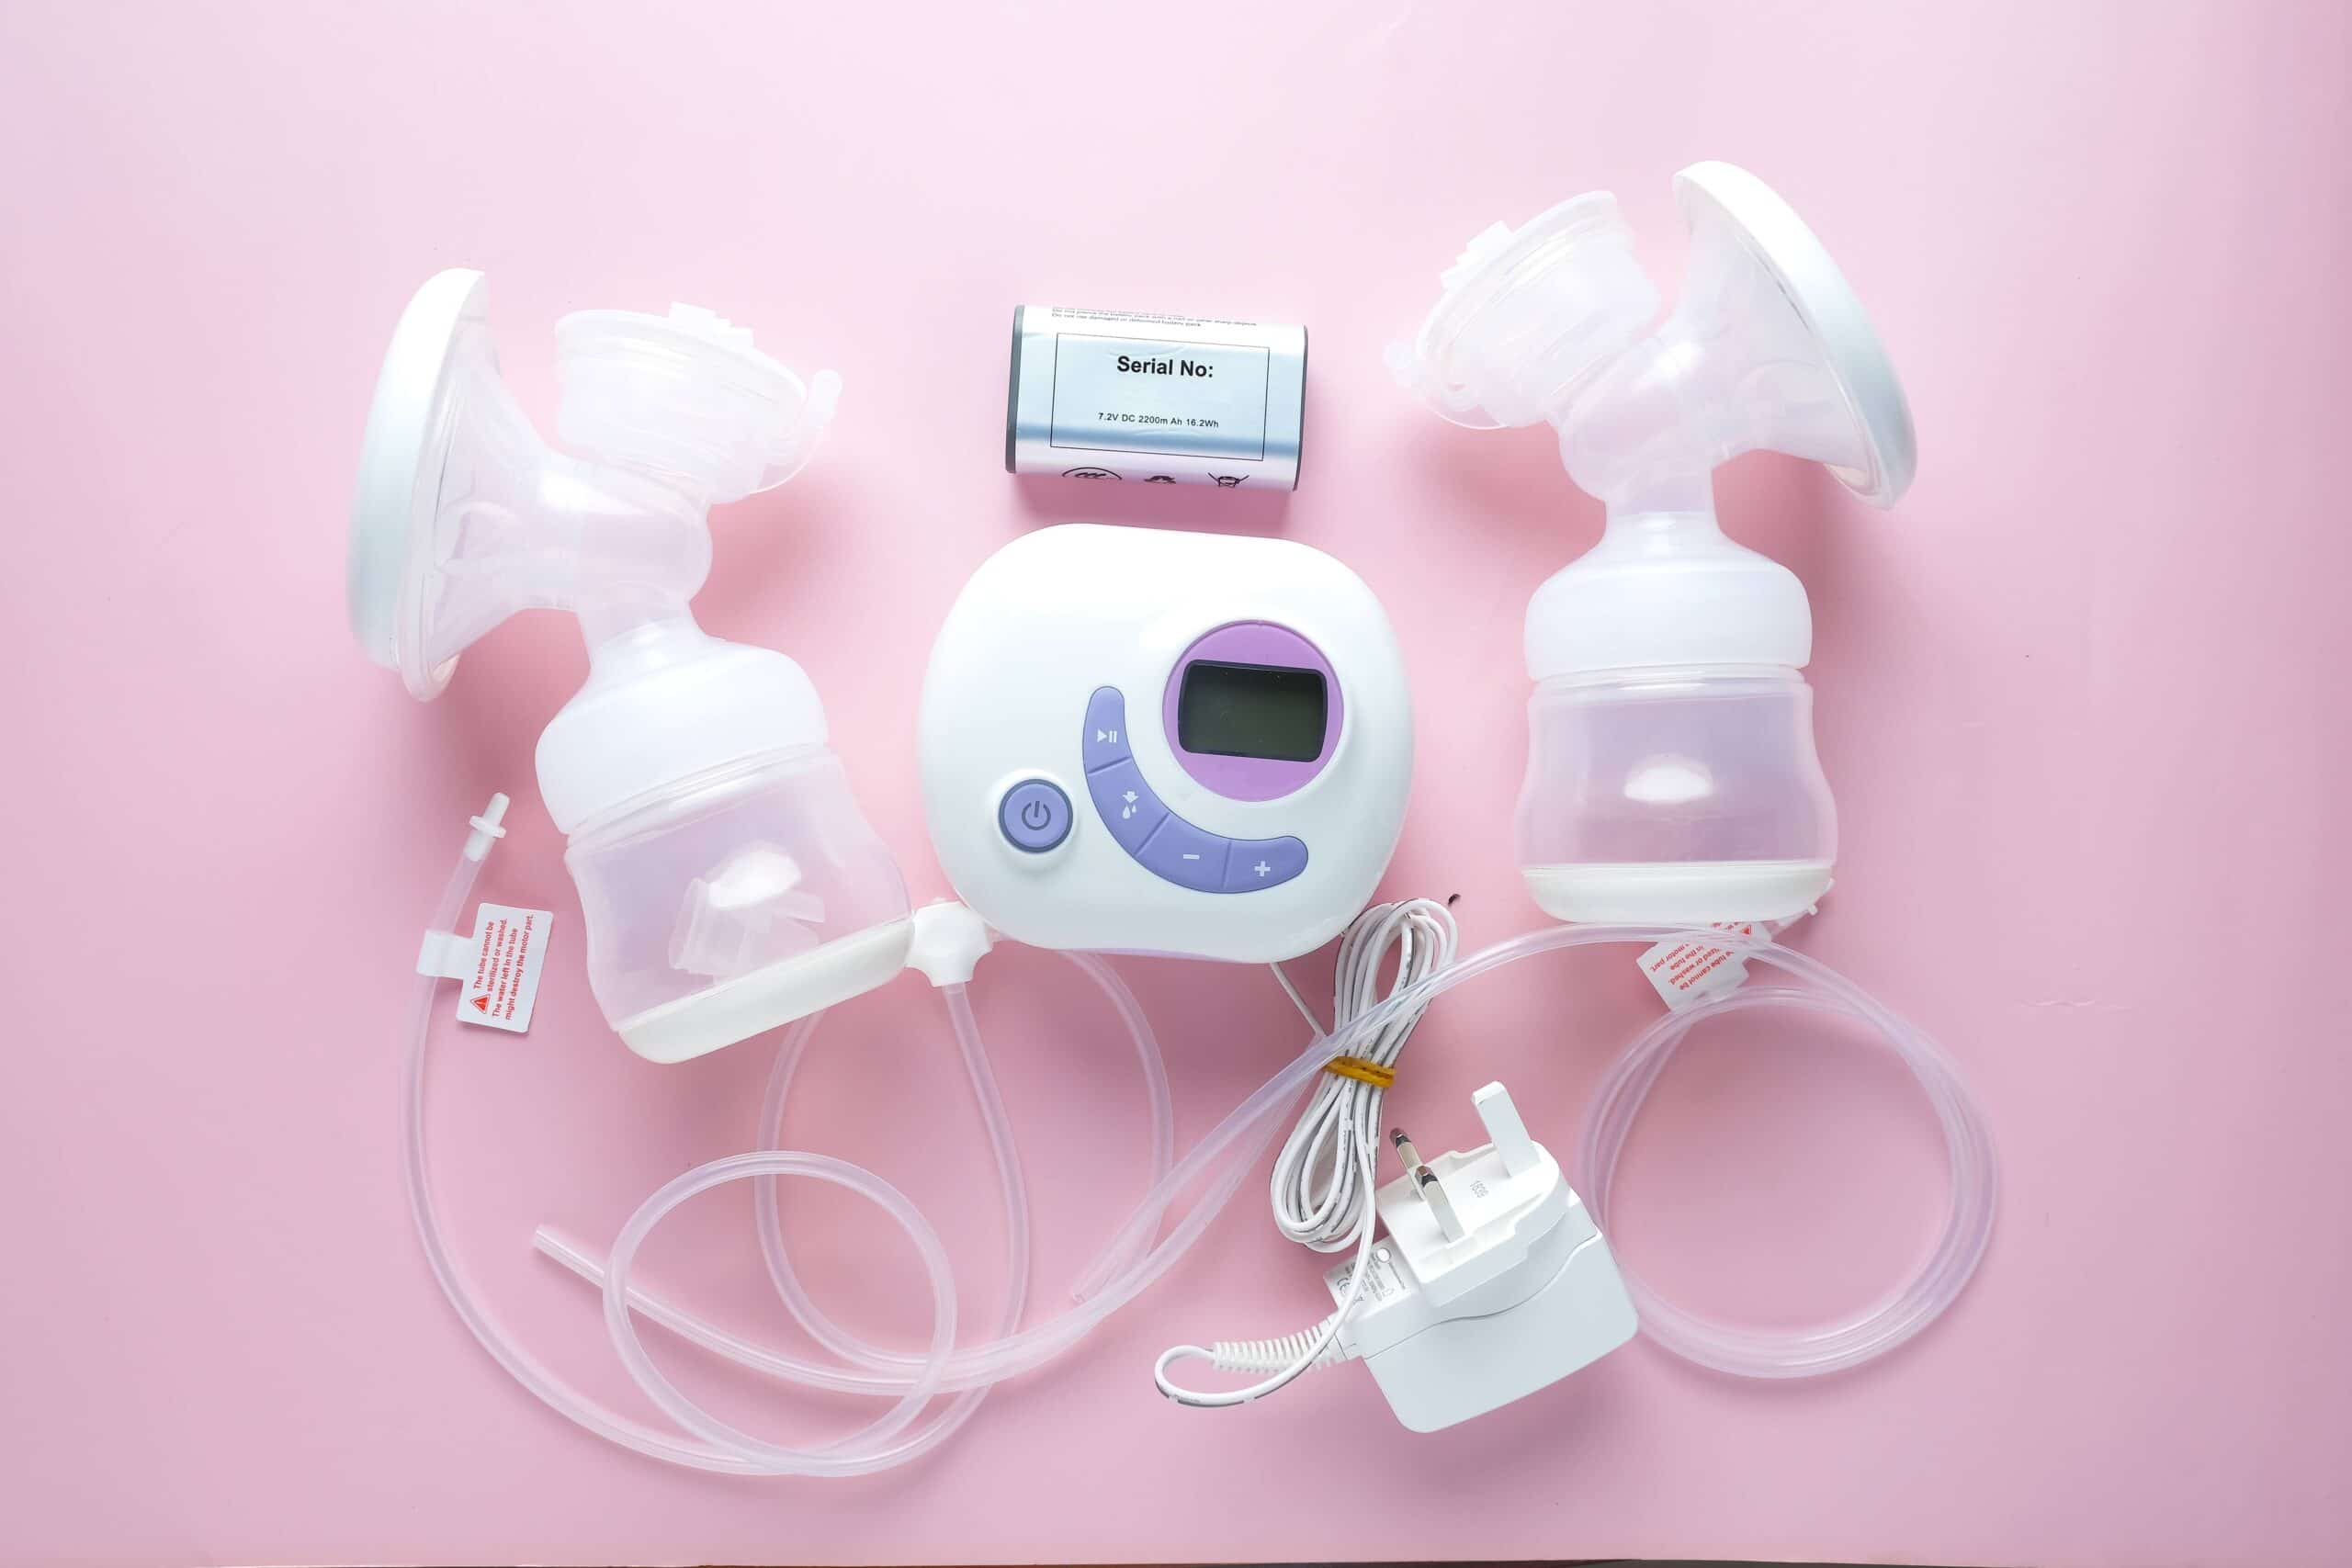 https://www.mother.ly/wp-content/uploads/2017/07/breast-pump-maternal-portable-electronic-hormone-breast-pumping-pacifier-storage-feeding-container_t20_PJoAwQ-scaled.jpg